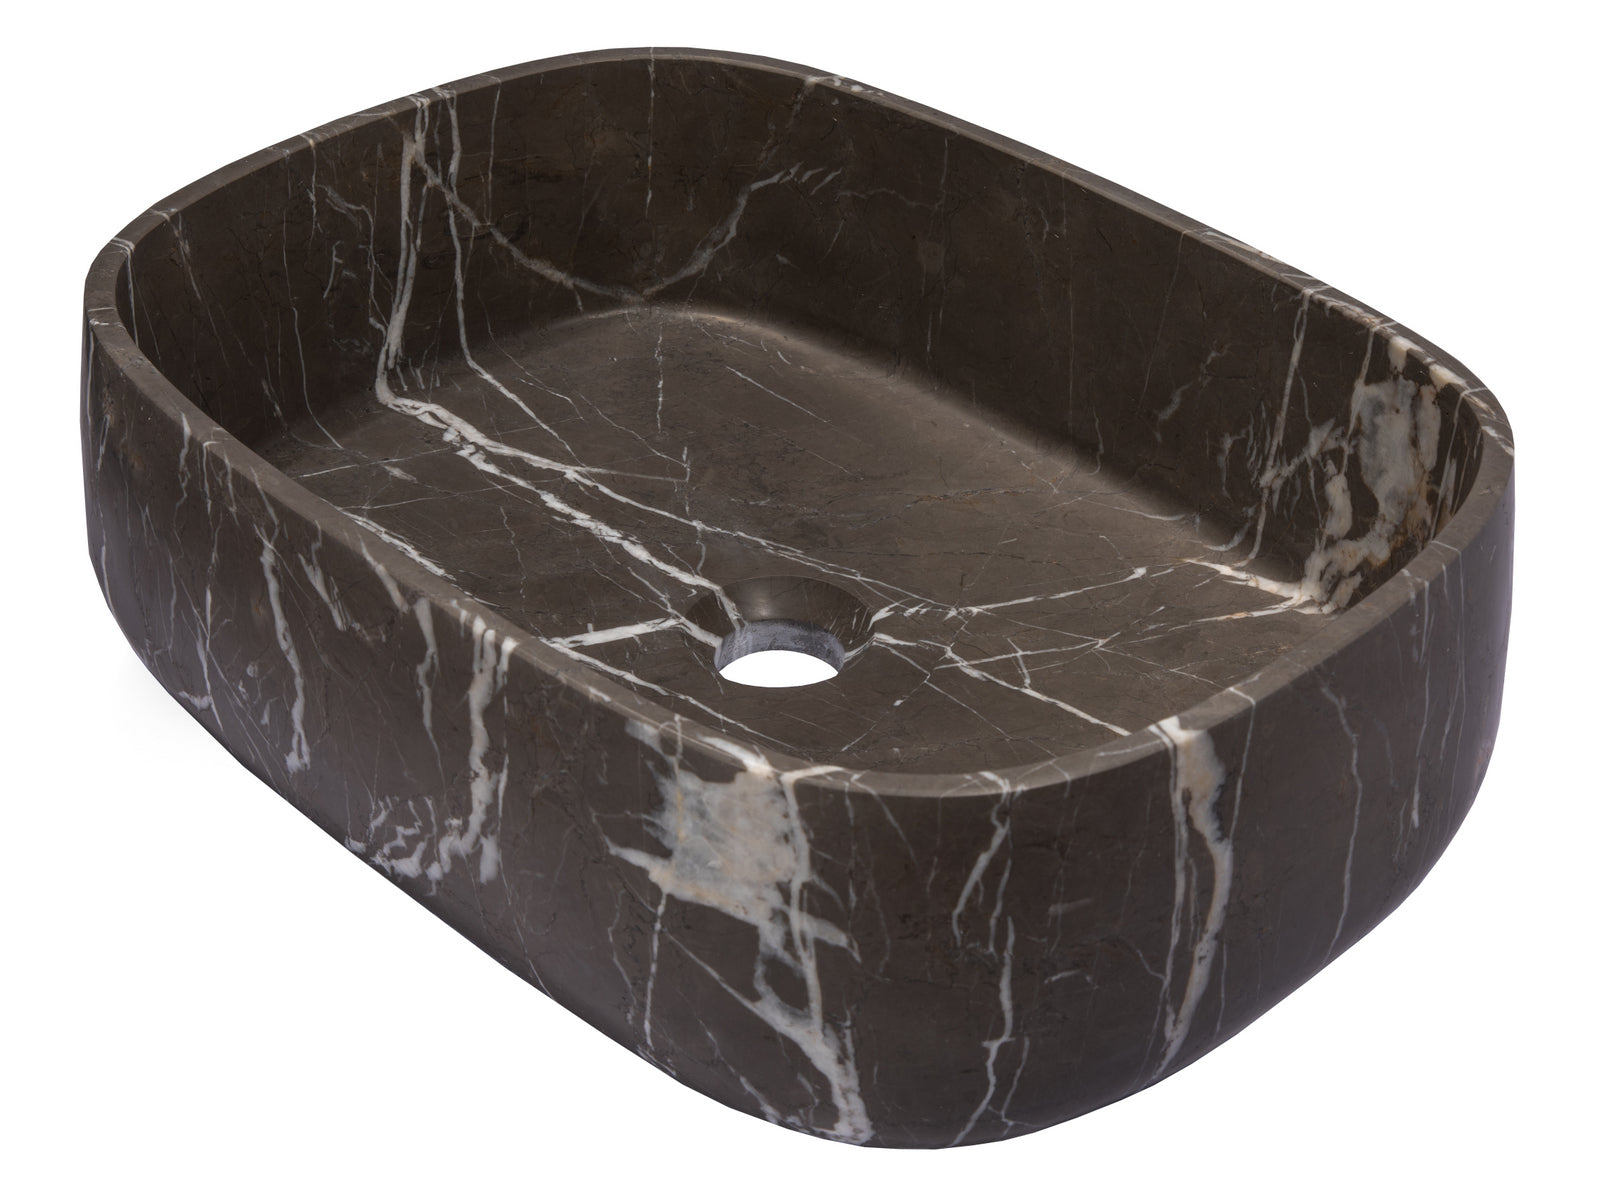 Rounded Rectangular Vessel Sink in Pietra Grey Marble